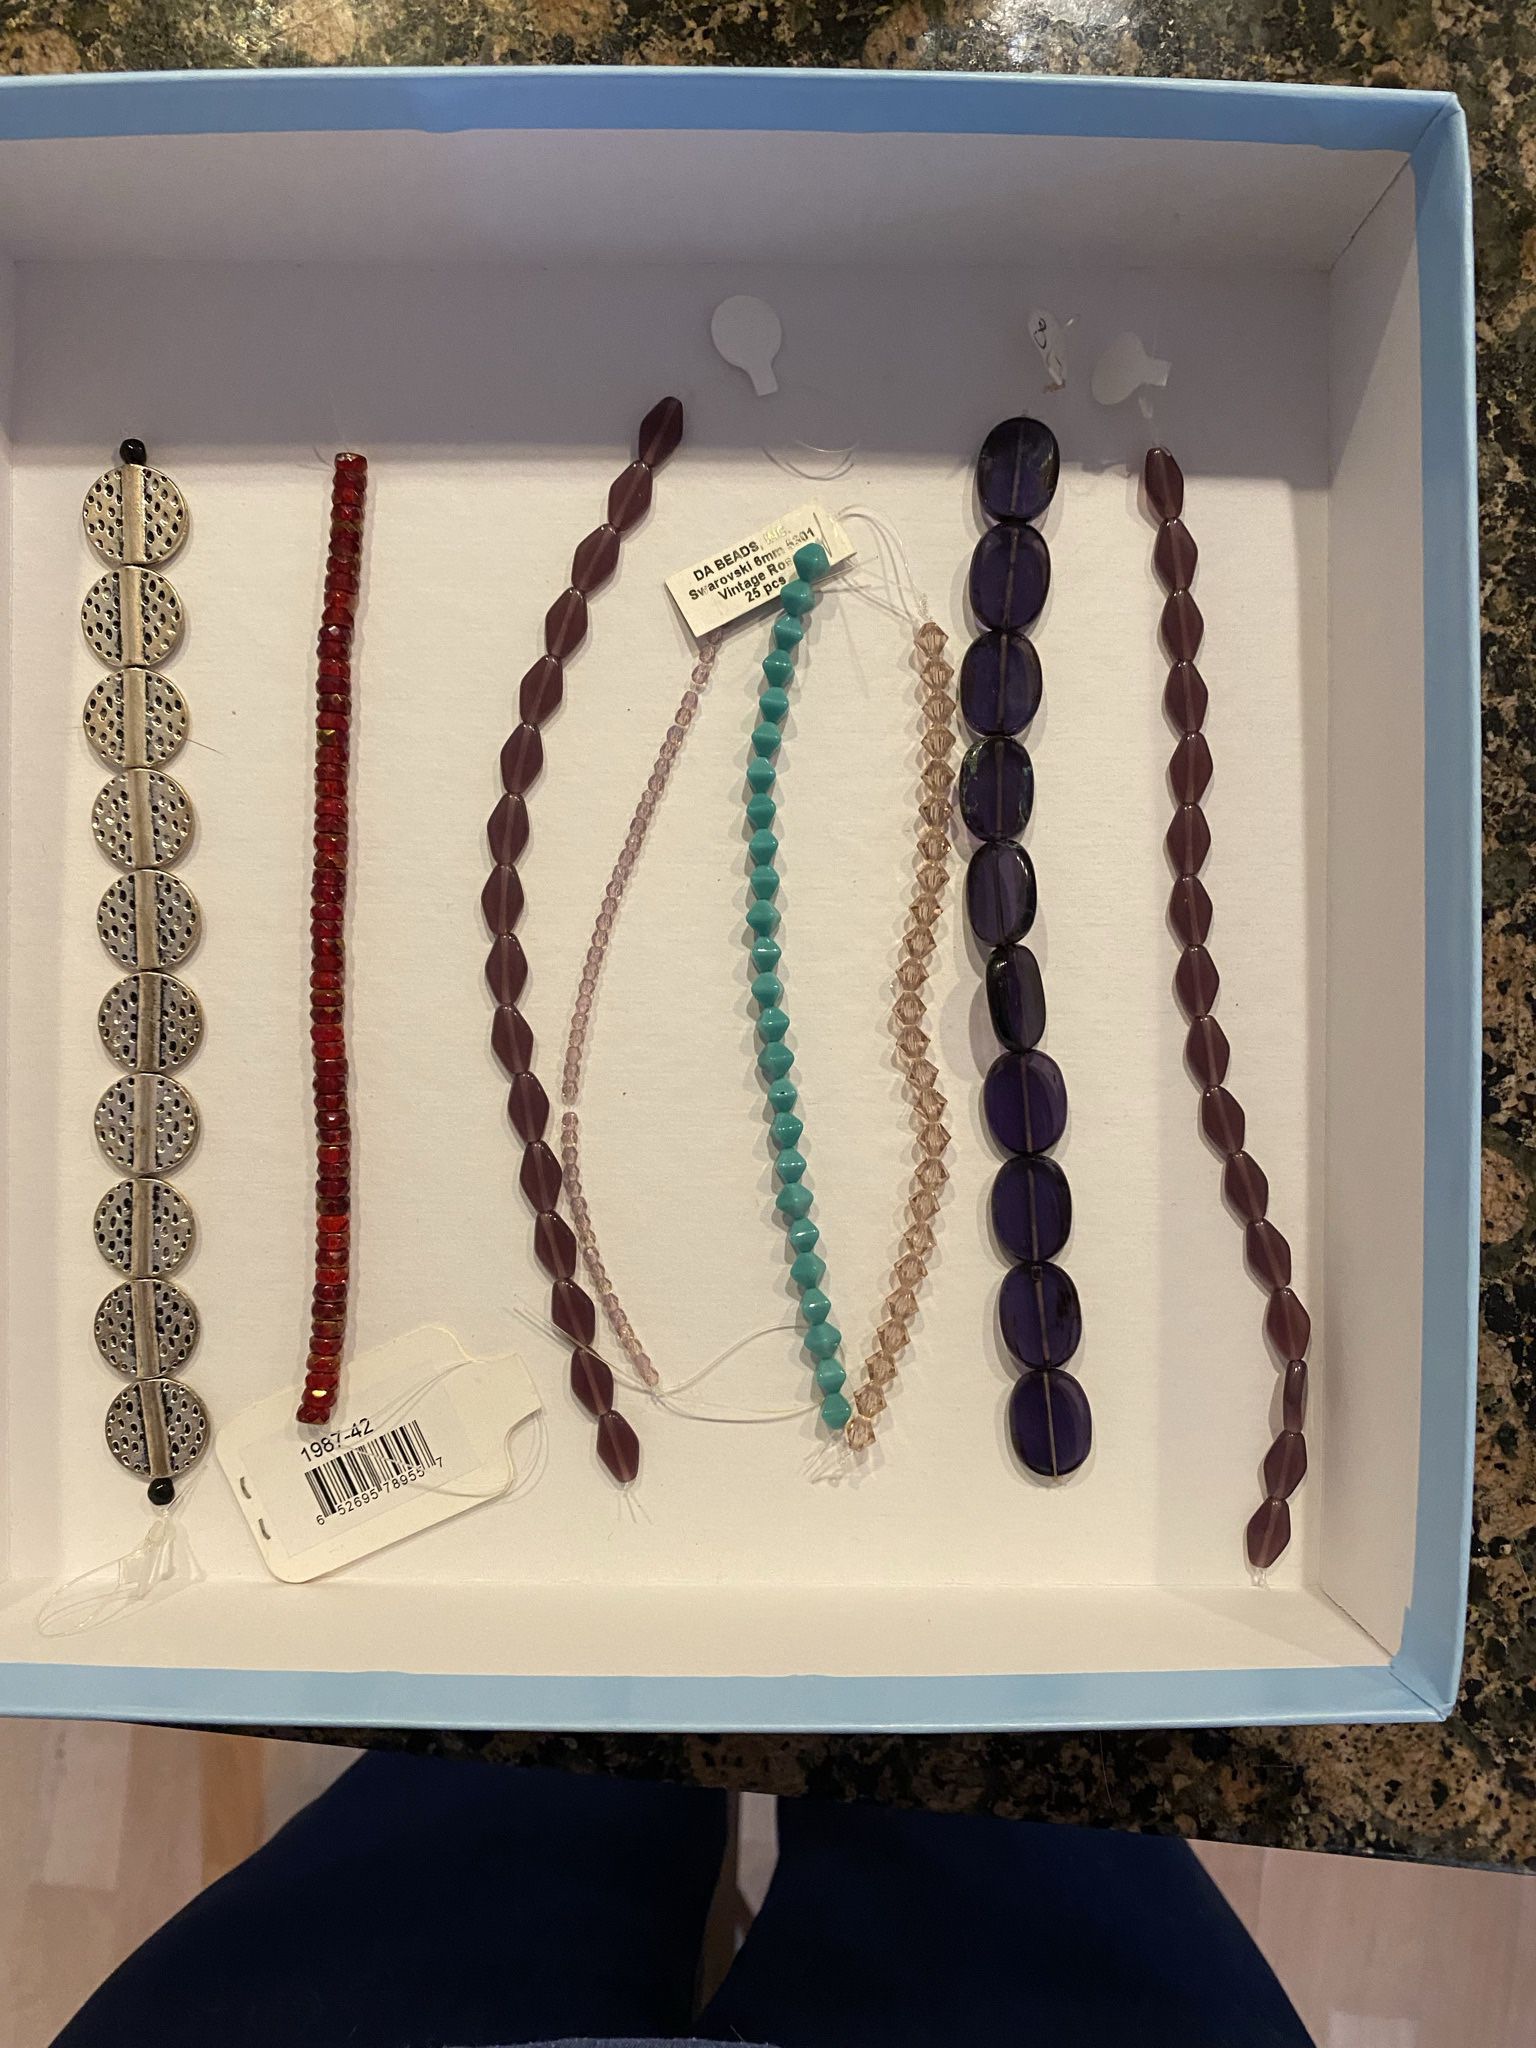 Massive Bead Collection - New And Used